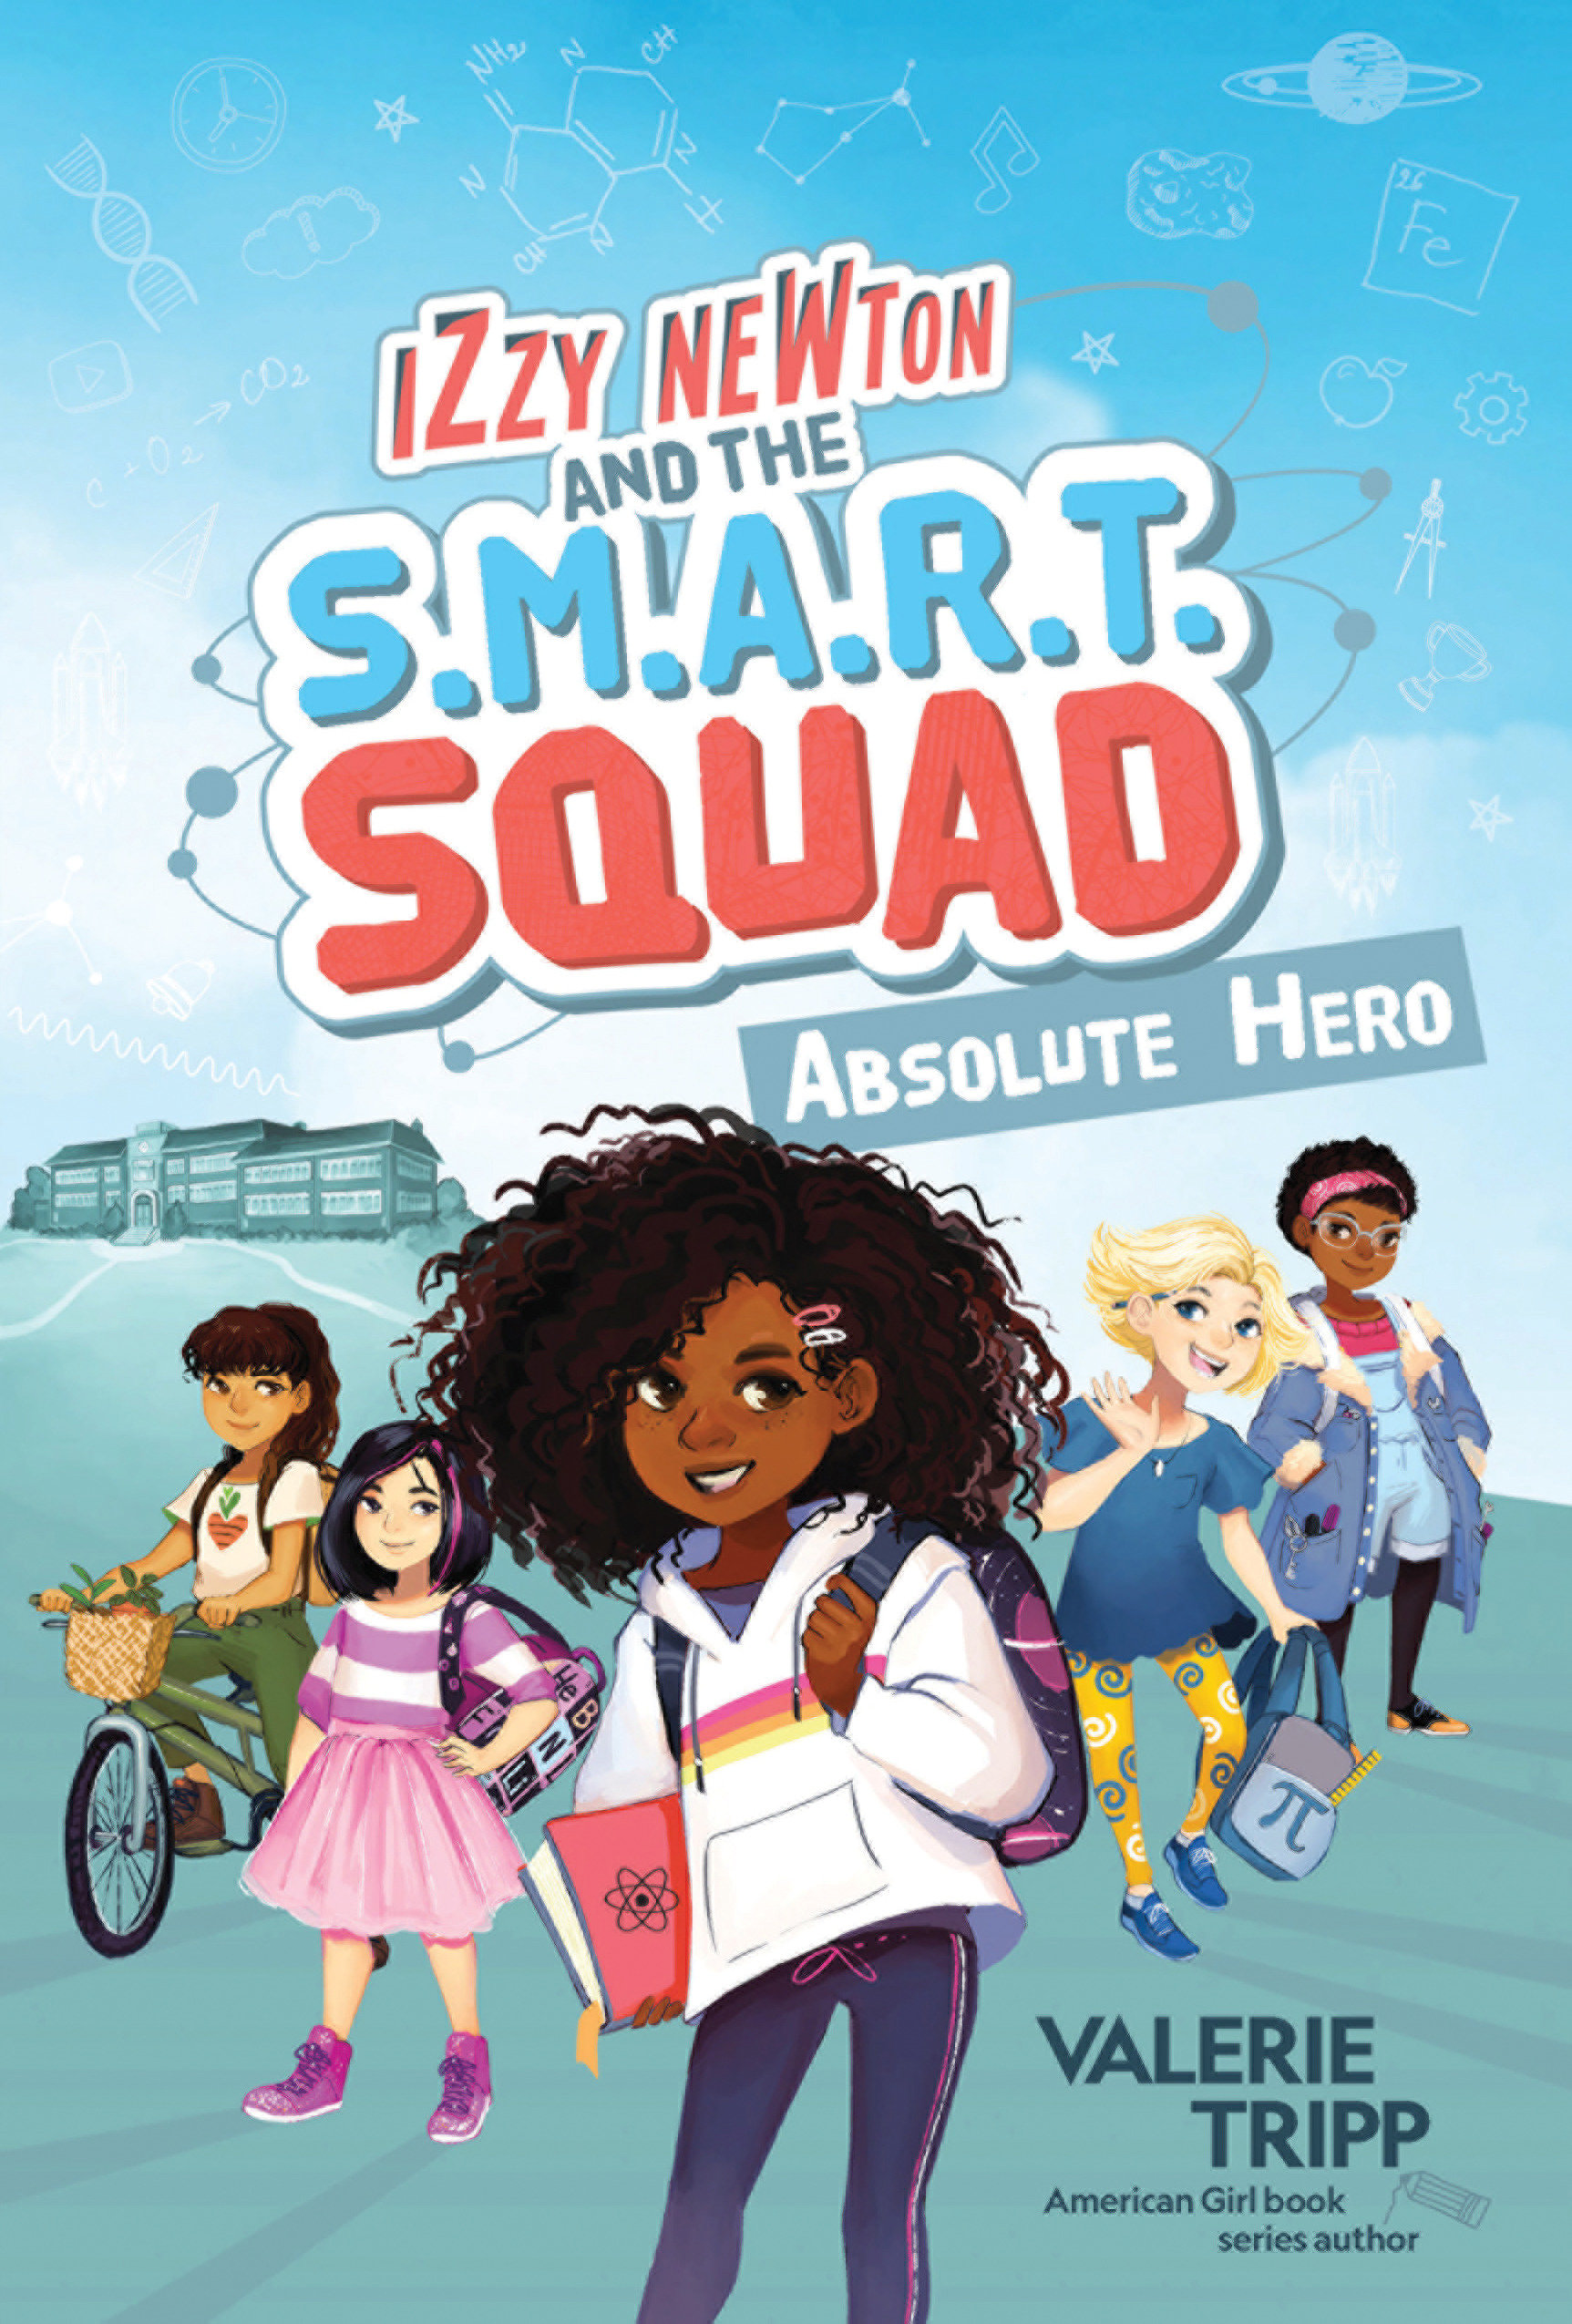 Izzy Newton and the S.M.A.R.T. Squad: Absolute Hero (Book 1) (Hardcover Book)